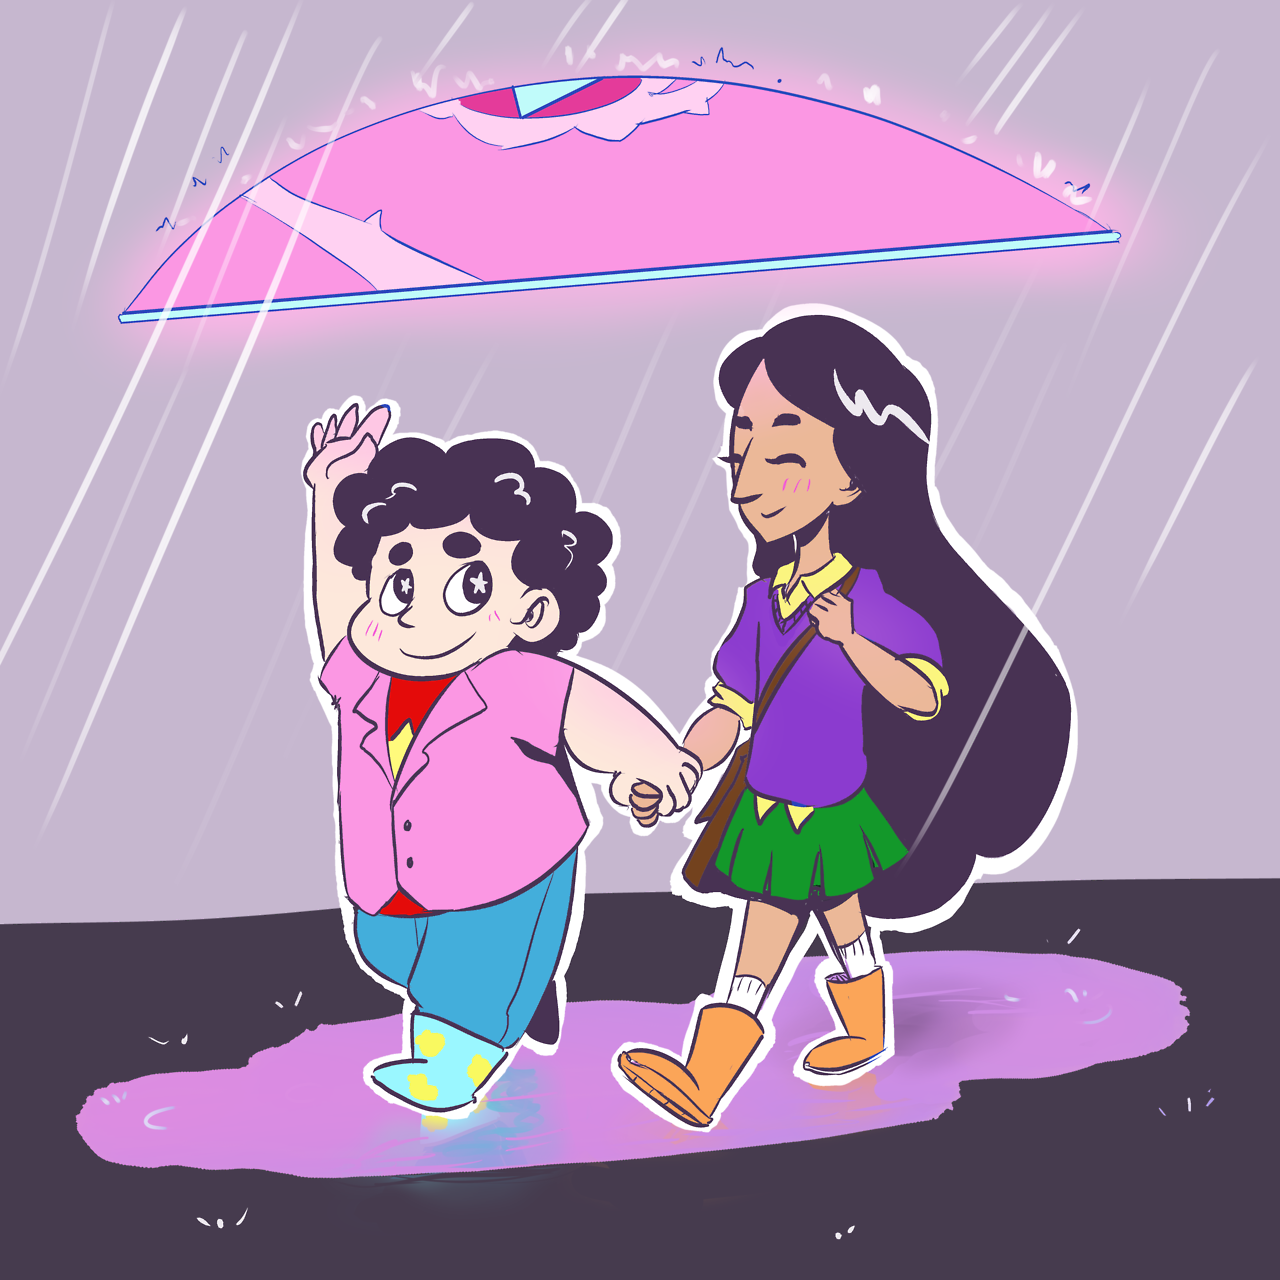 I drew them on a mission! The mission is to hold hands and go to the library.